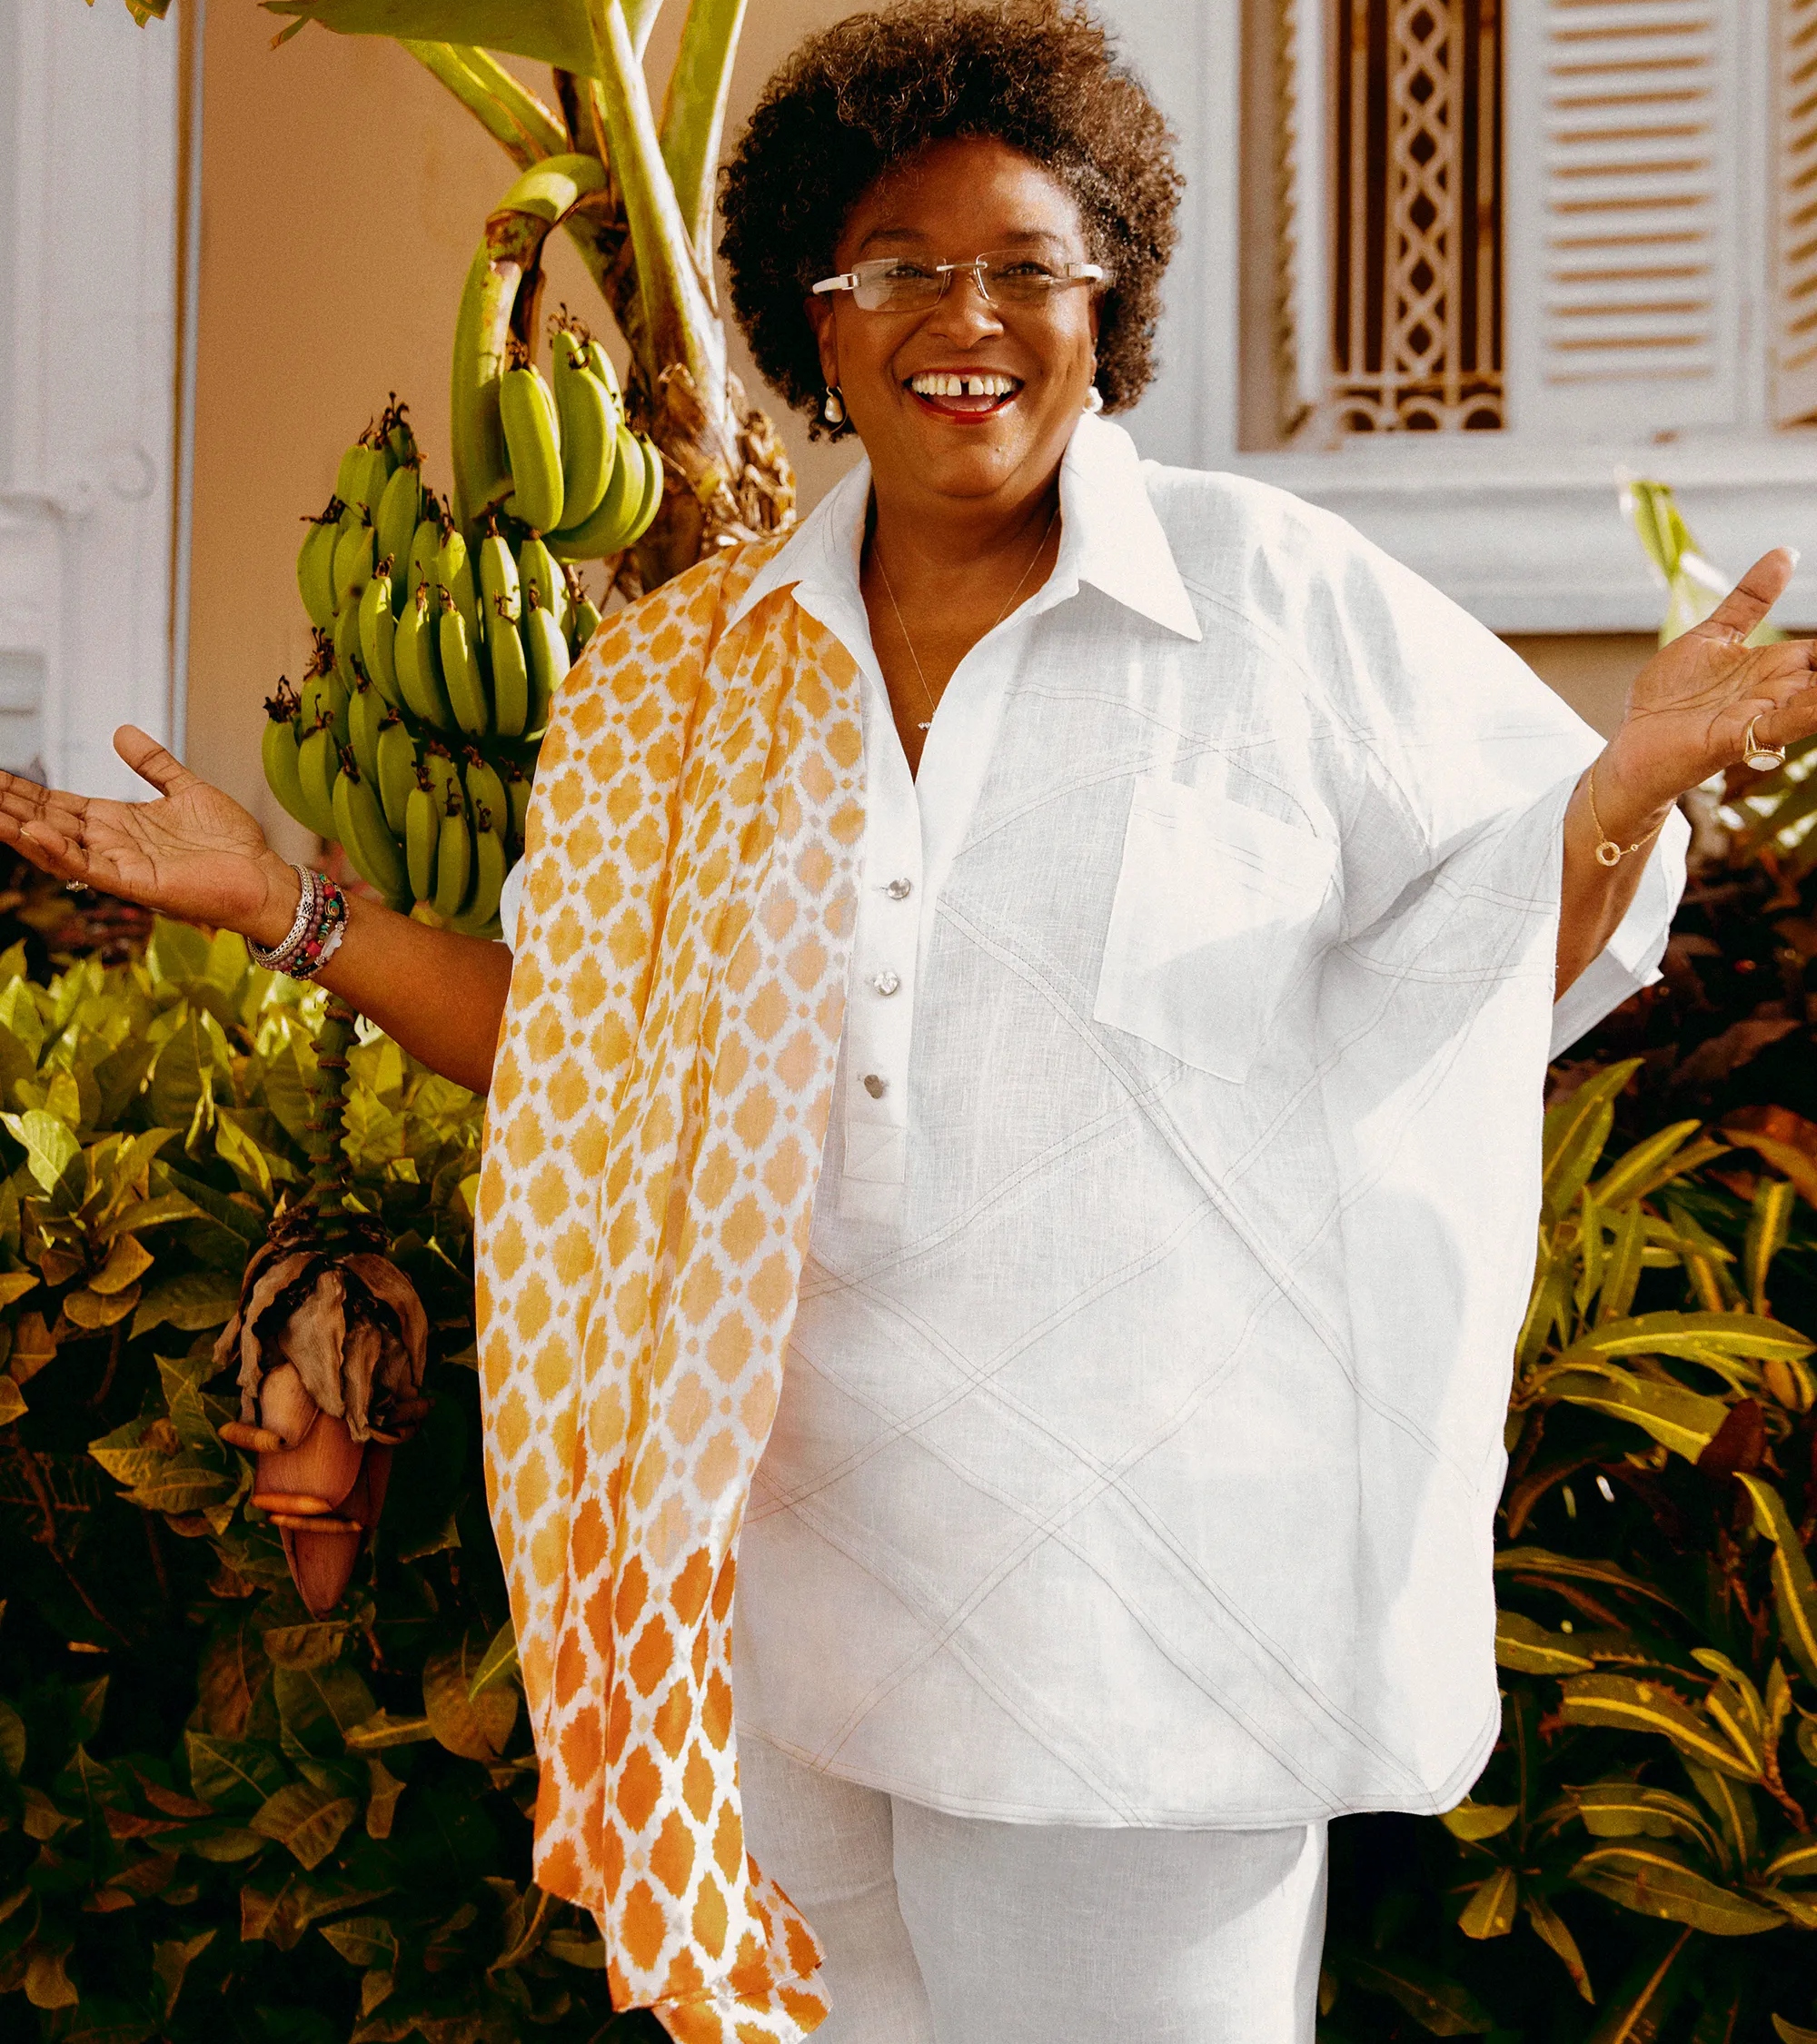 Do you want to know more about Mia Mottley’s early life